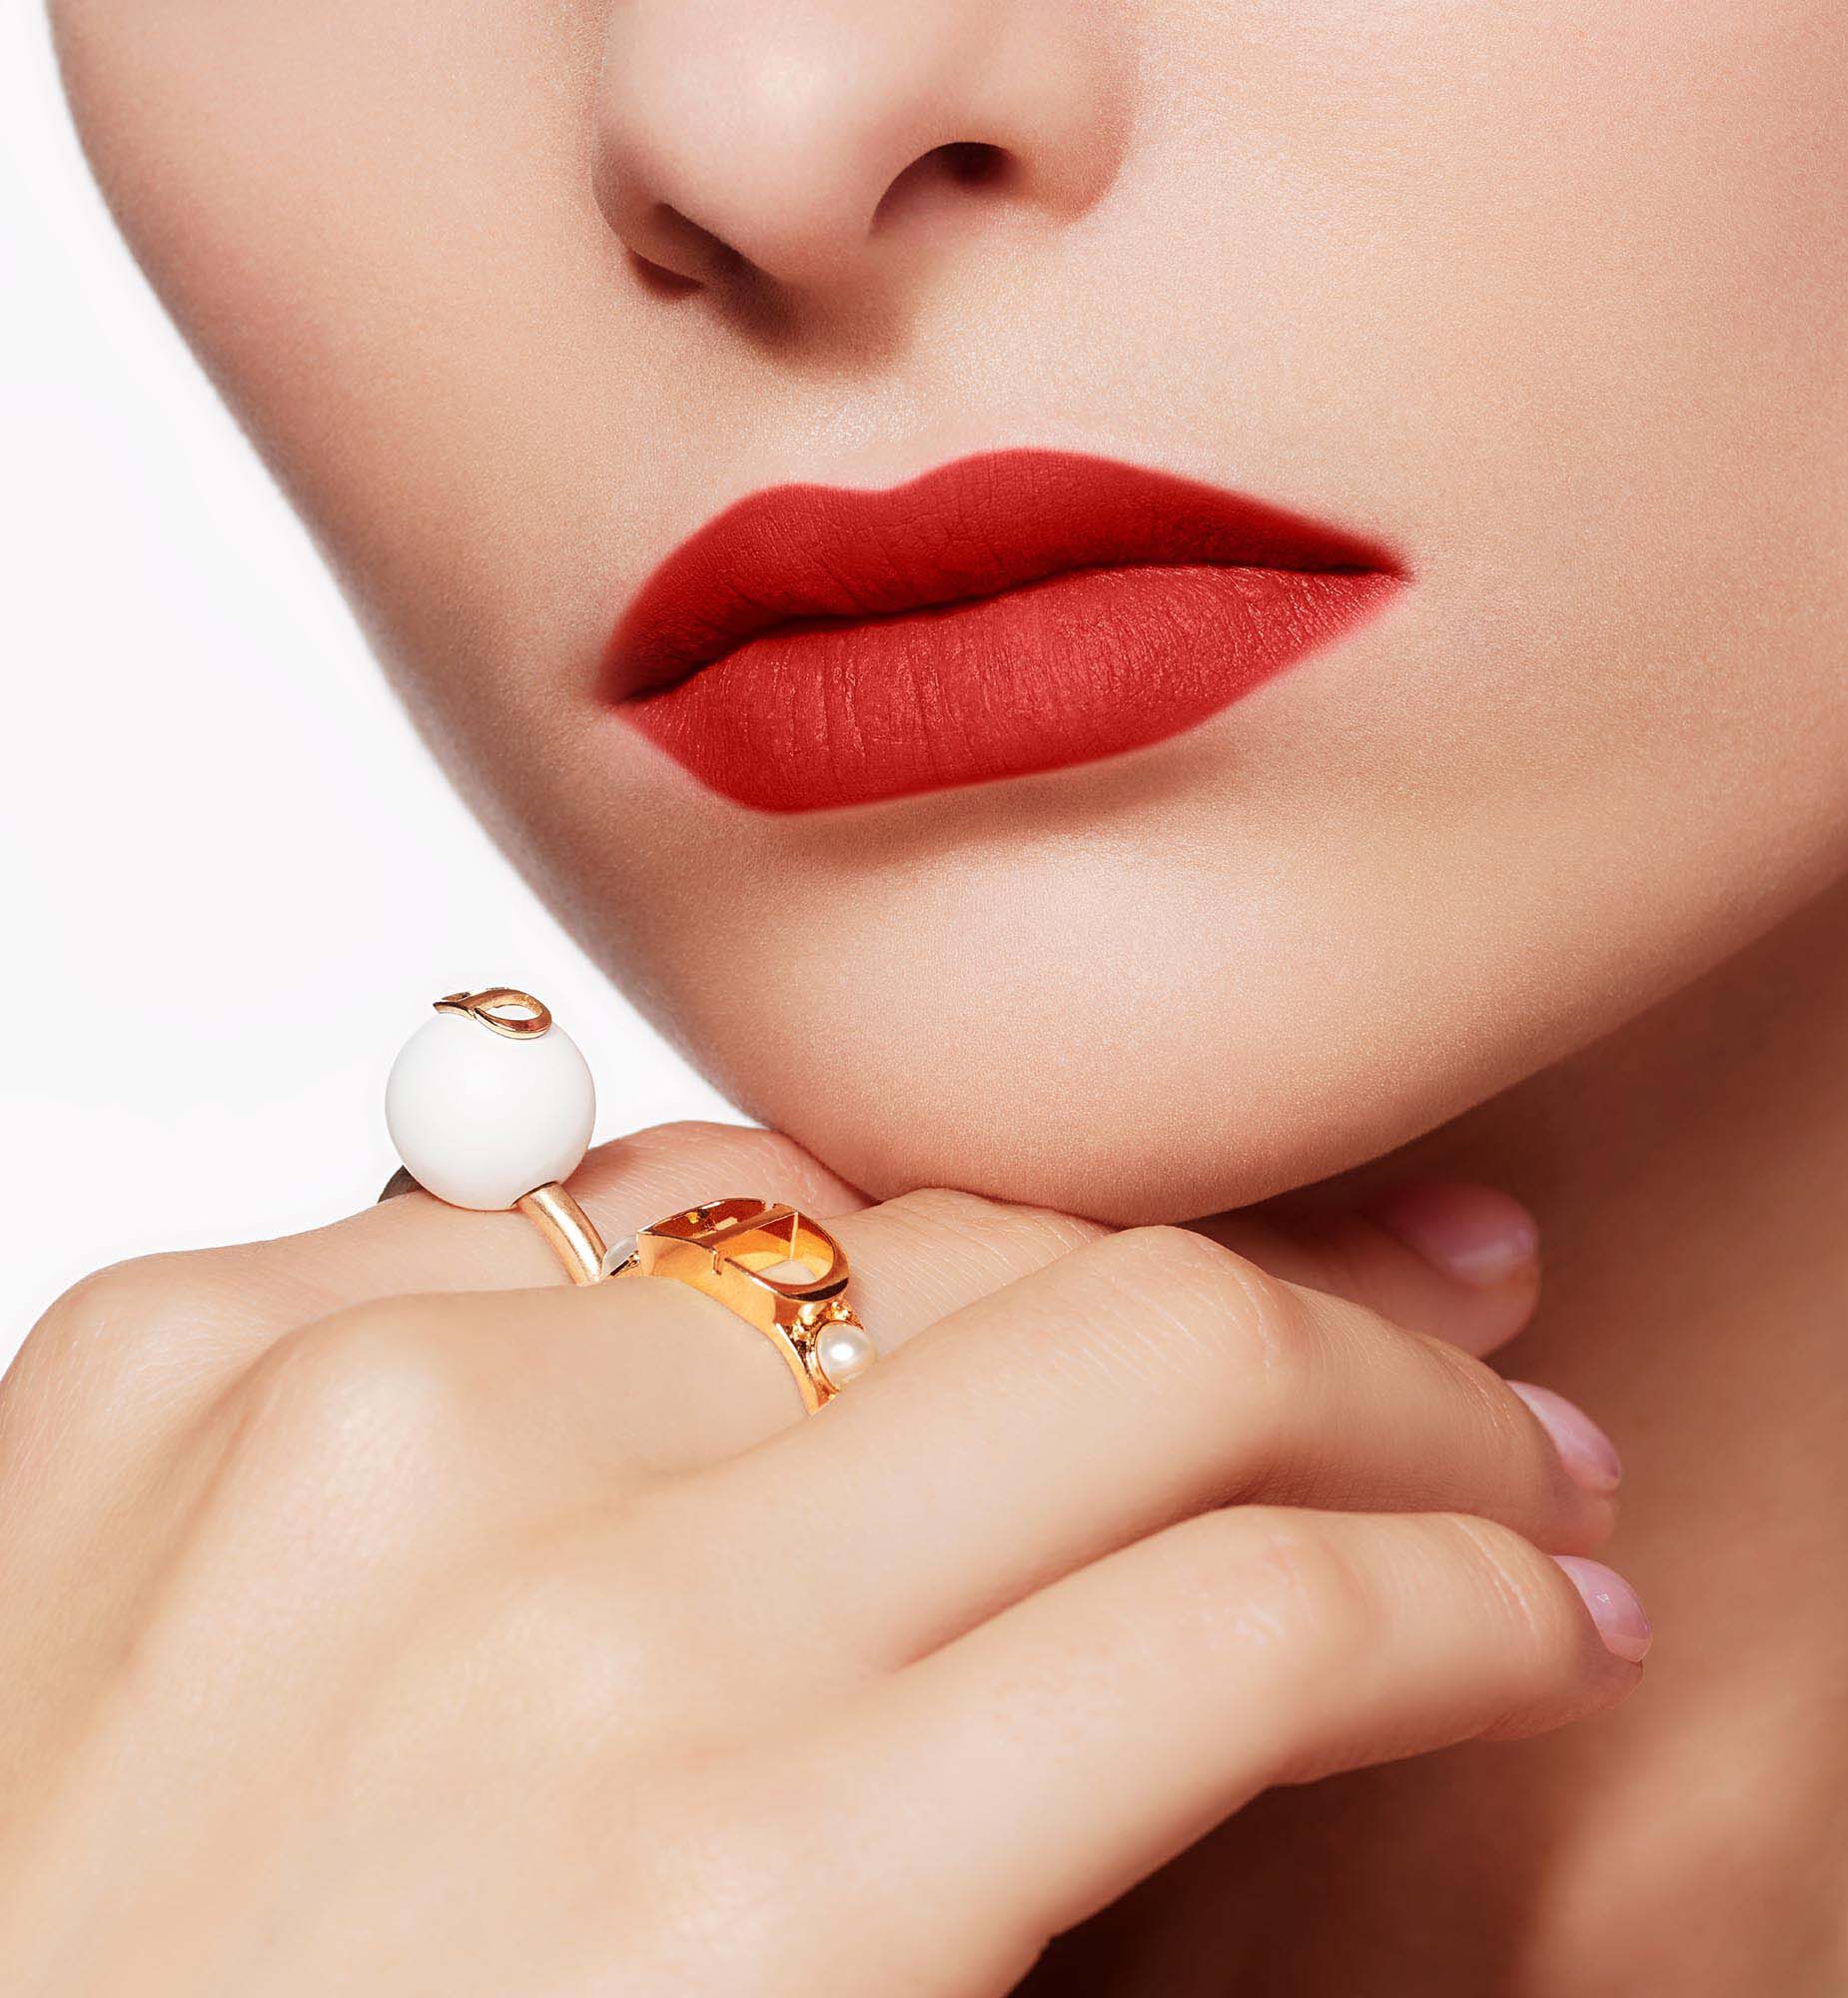 Dior Rouge Dior Forever TransferProof Lipstick Launches July 21st